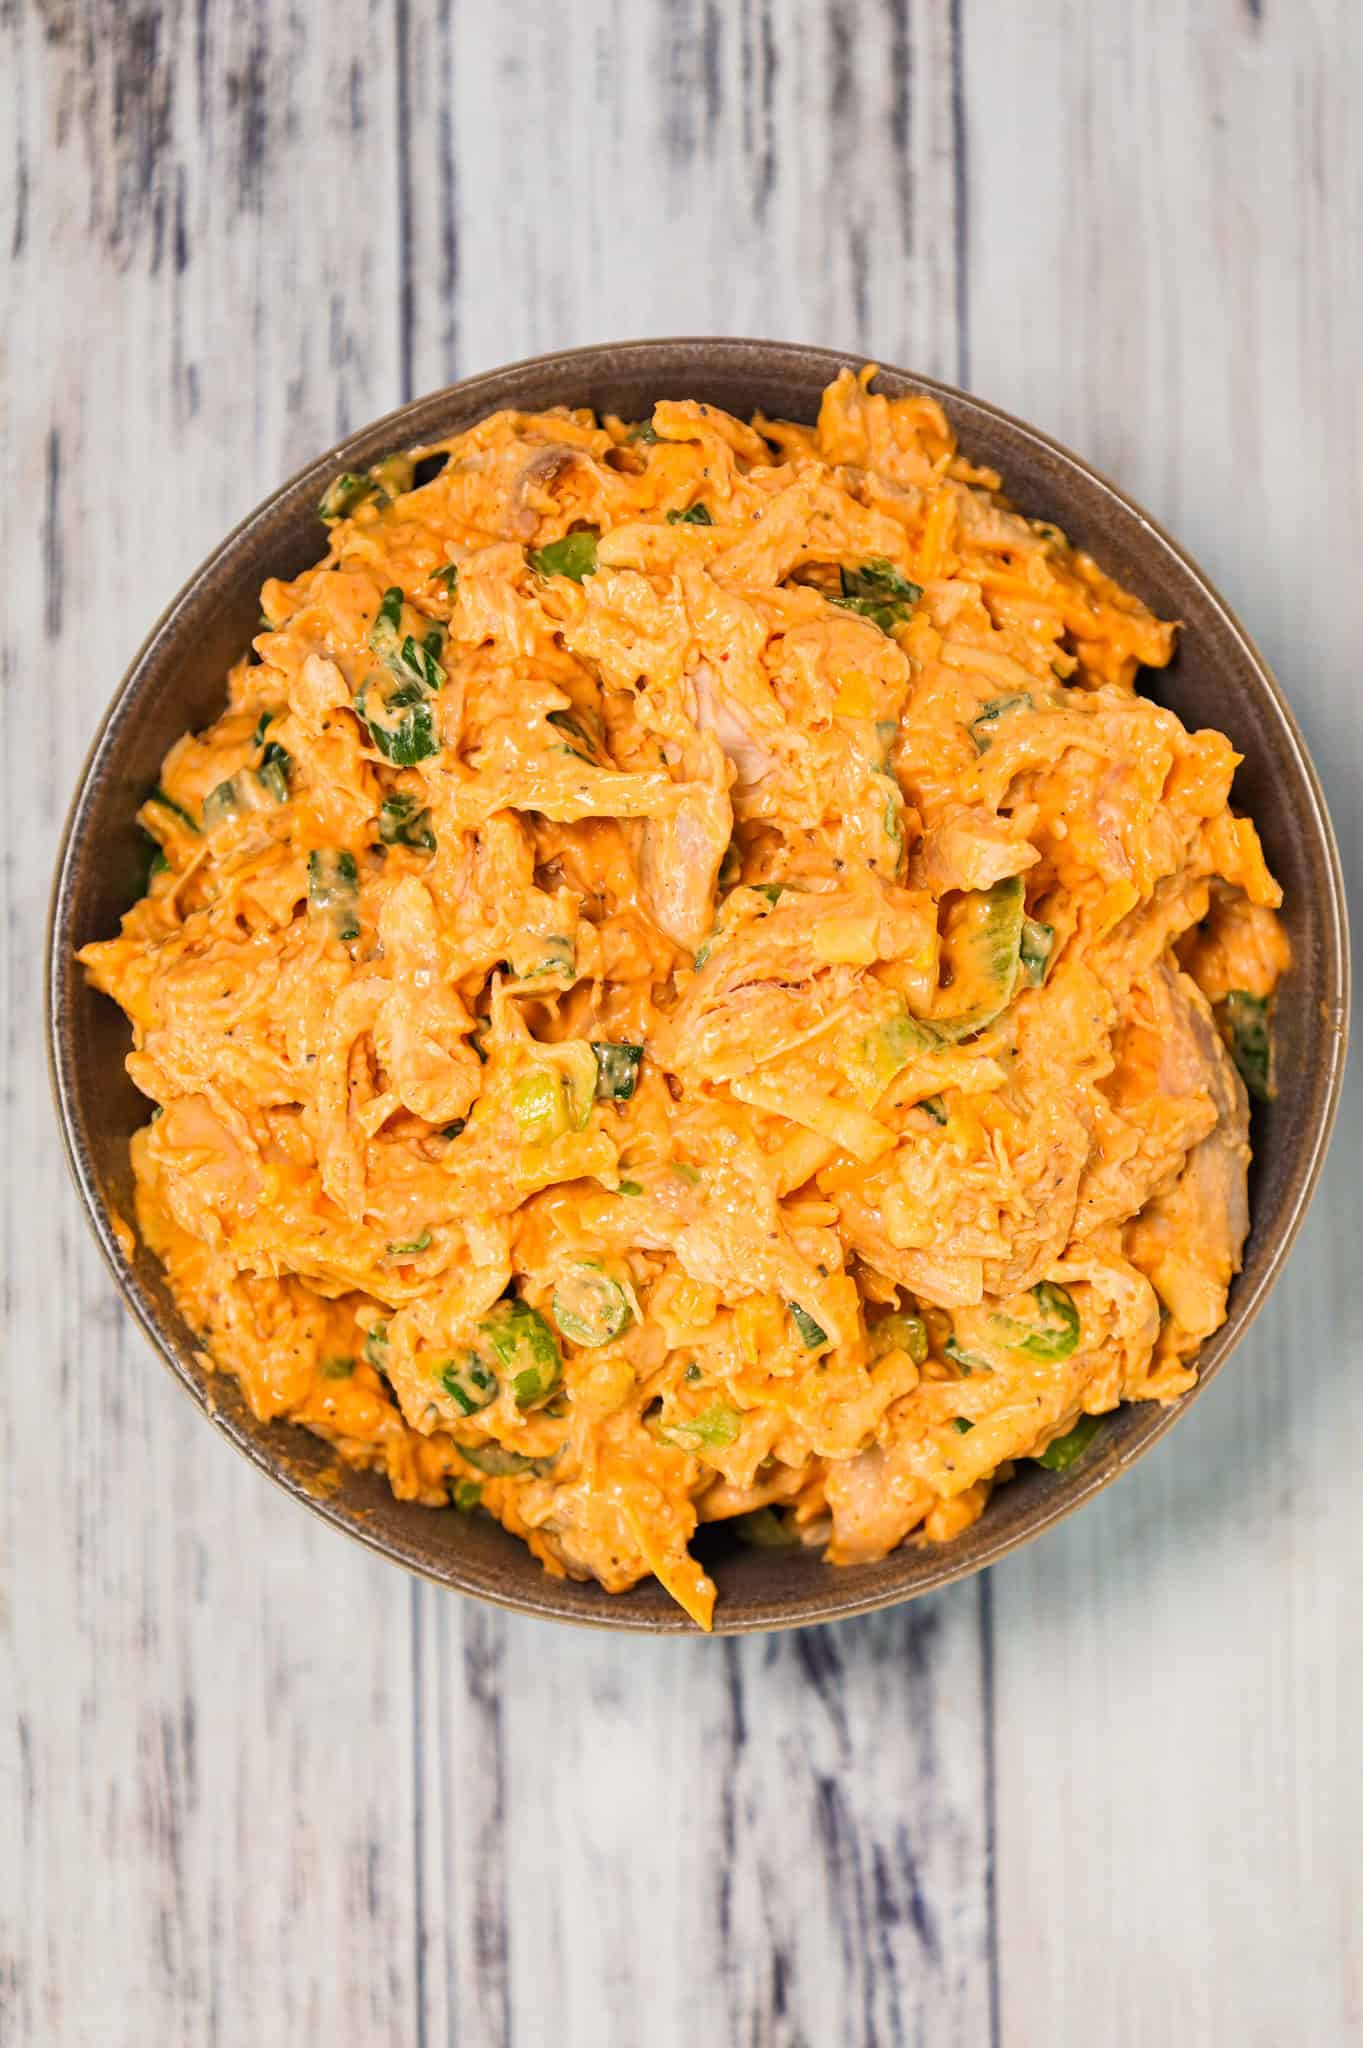 Buffalo Chicken Salad is a delicious recipe using rotisserie chicken, chopped green onions and shredded cheddar cheese all tossed in mayo, Buffalo sauce and ranch dressing.